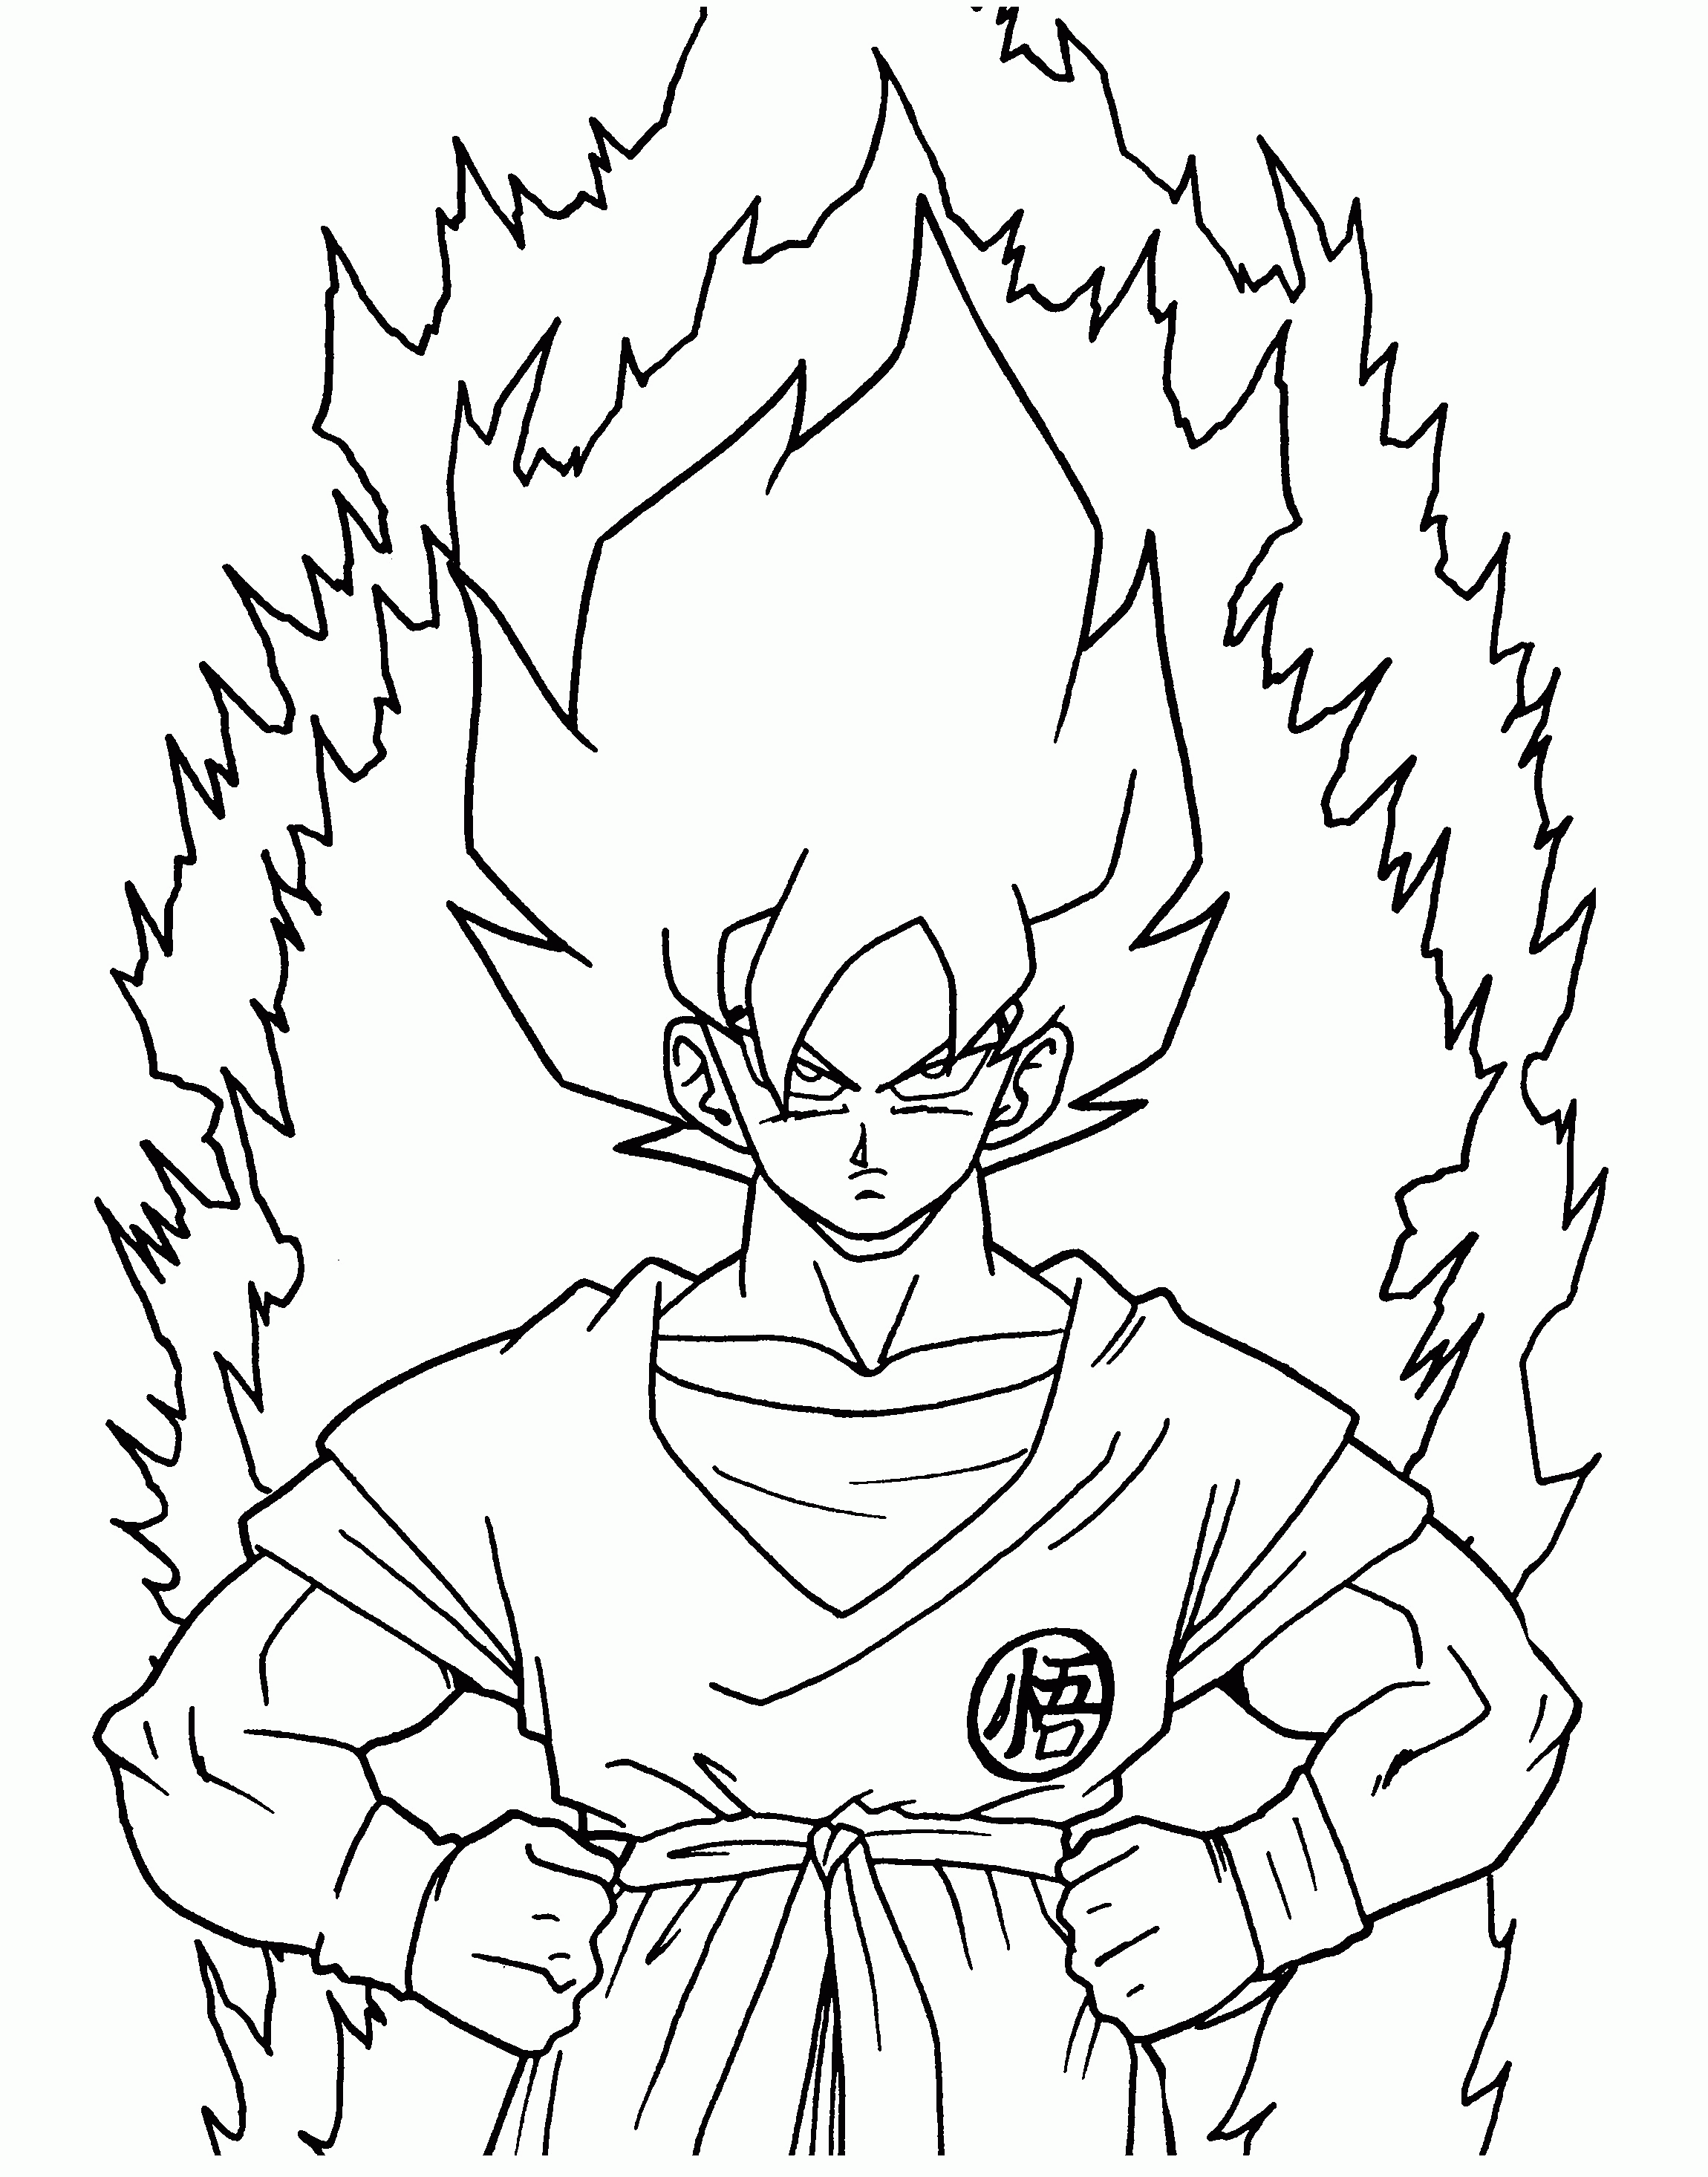 dragon-ball-z-coloring-pages-3.jpg